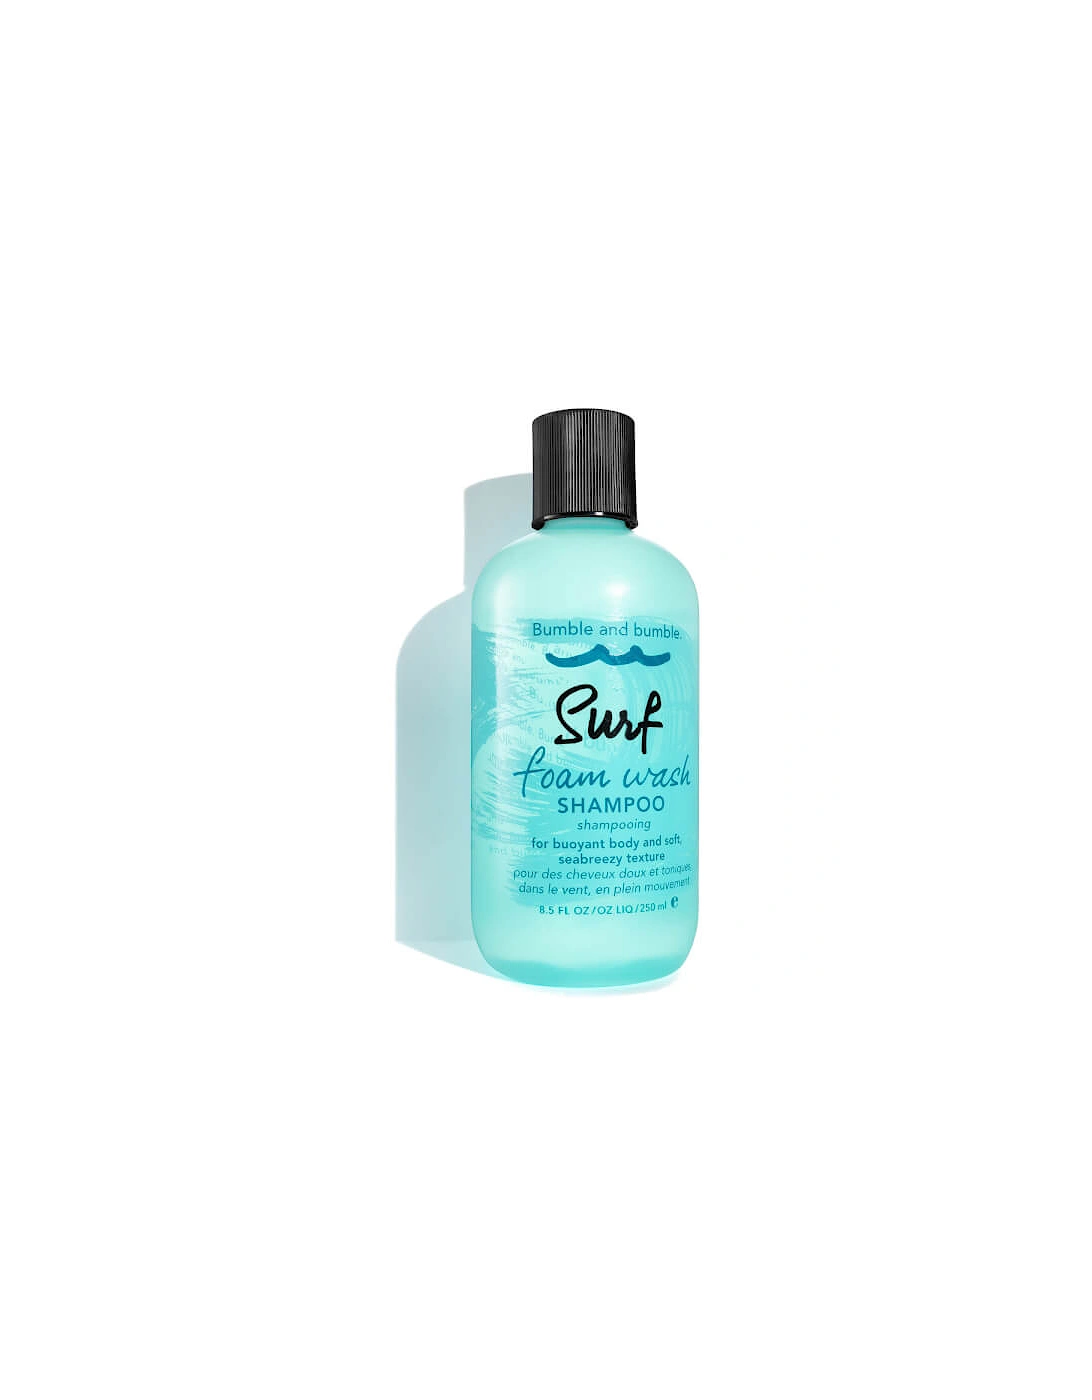 Bumble and bumble Surf Foam Wash Shampoo 250ml, 2 of 1